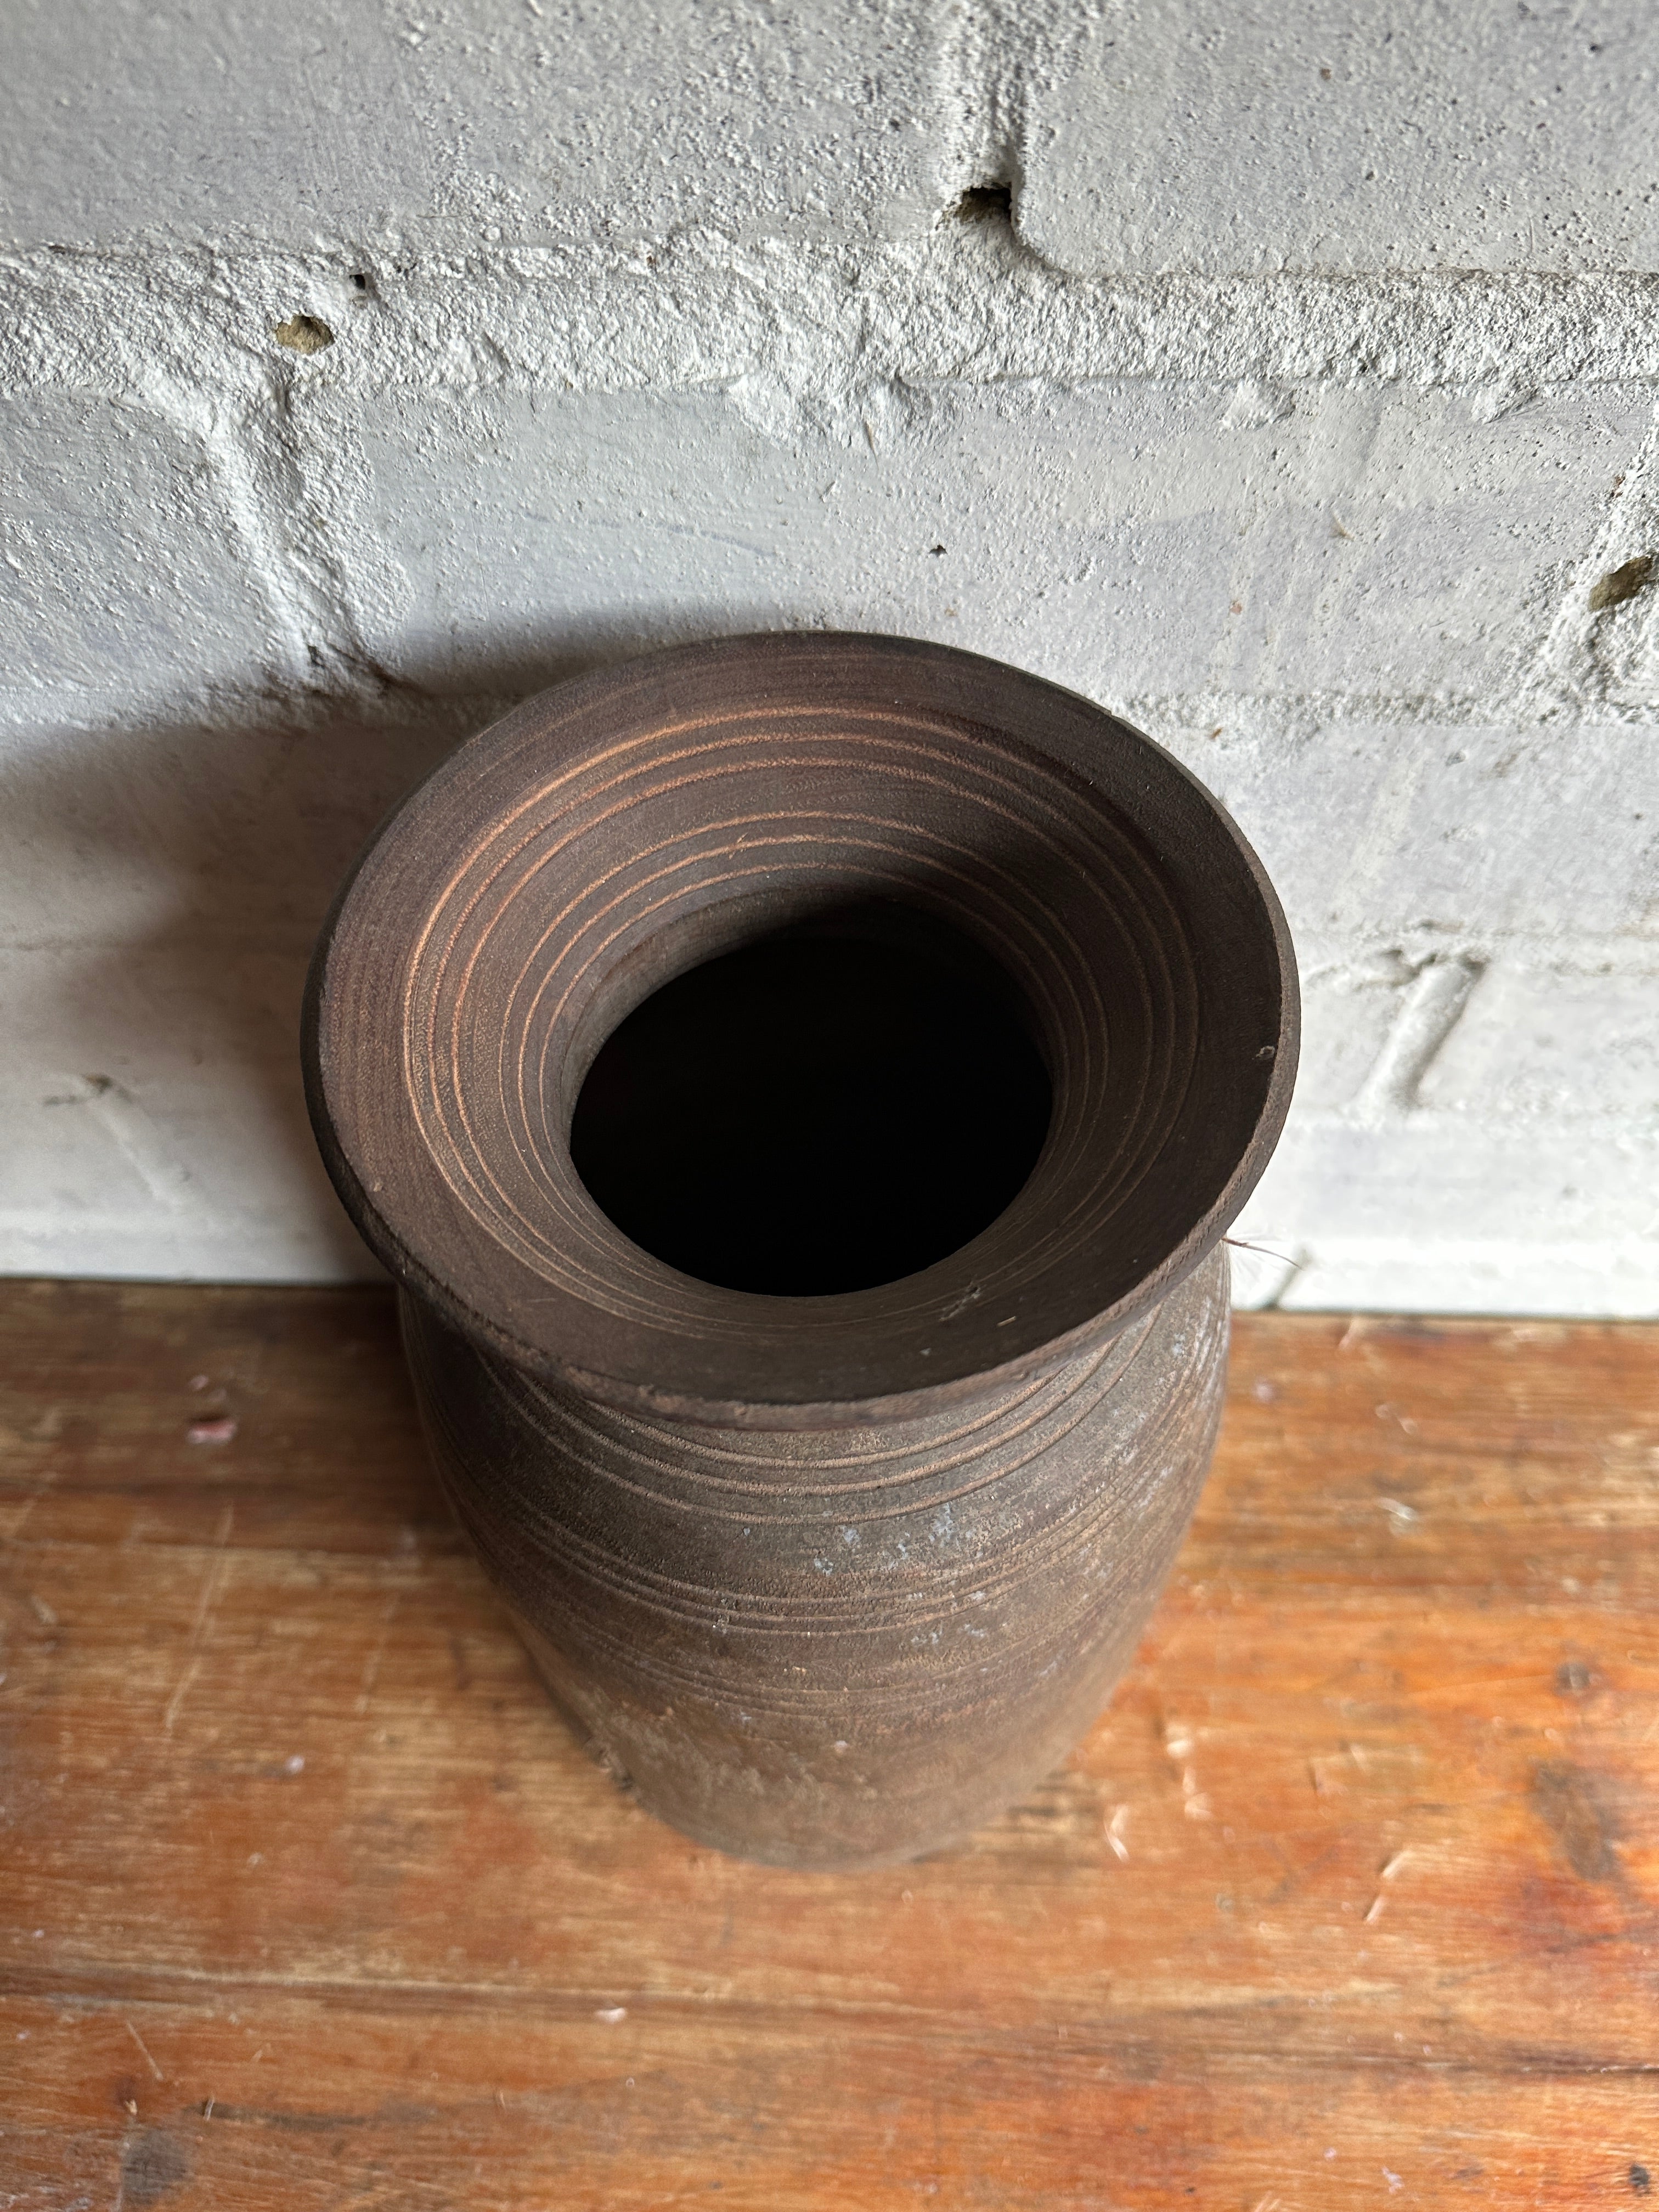 19th Century Tibetan Carved Wooden Curd Pot